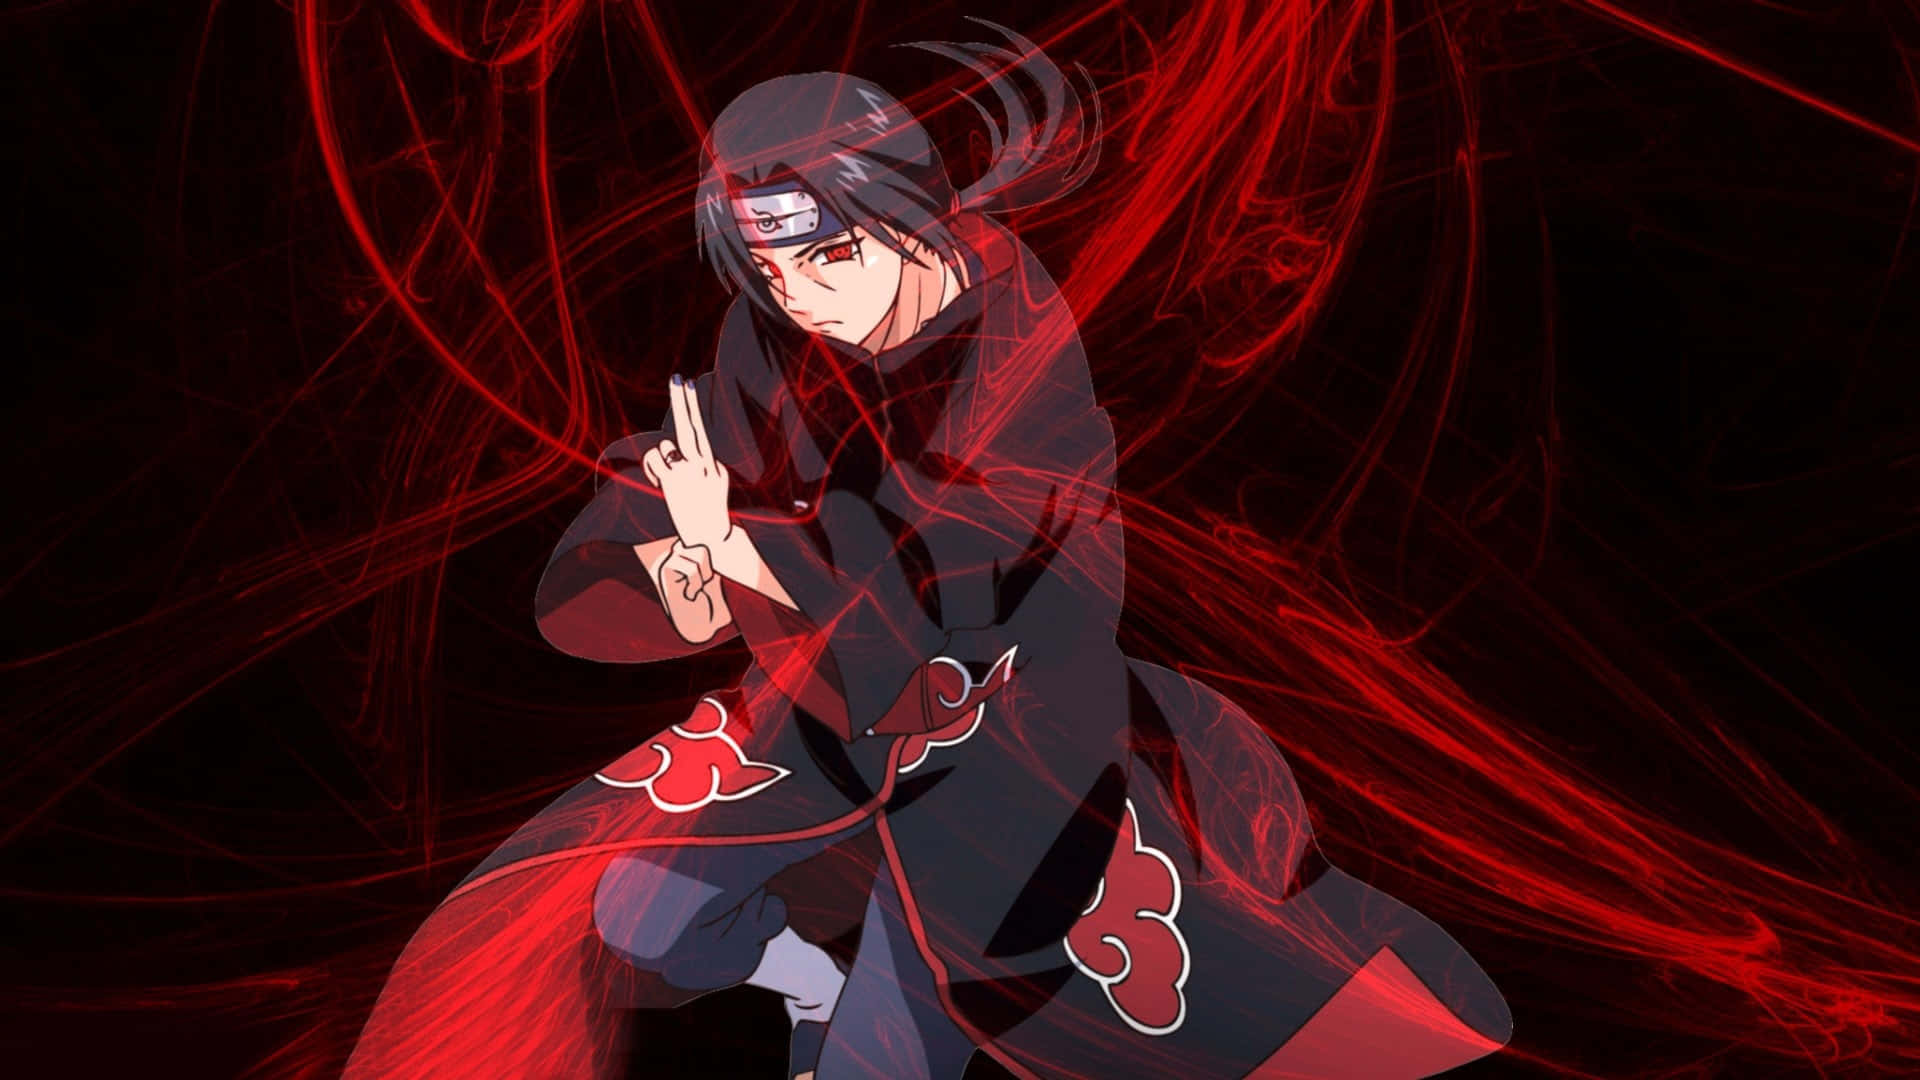 Itachi Aesthetic Posing With Jutsu Style In Black And Red Background. Wallpaper